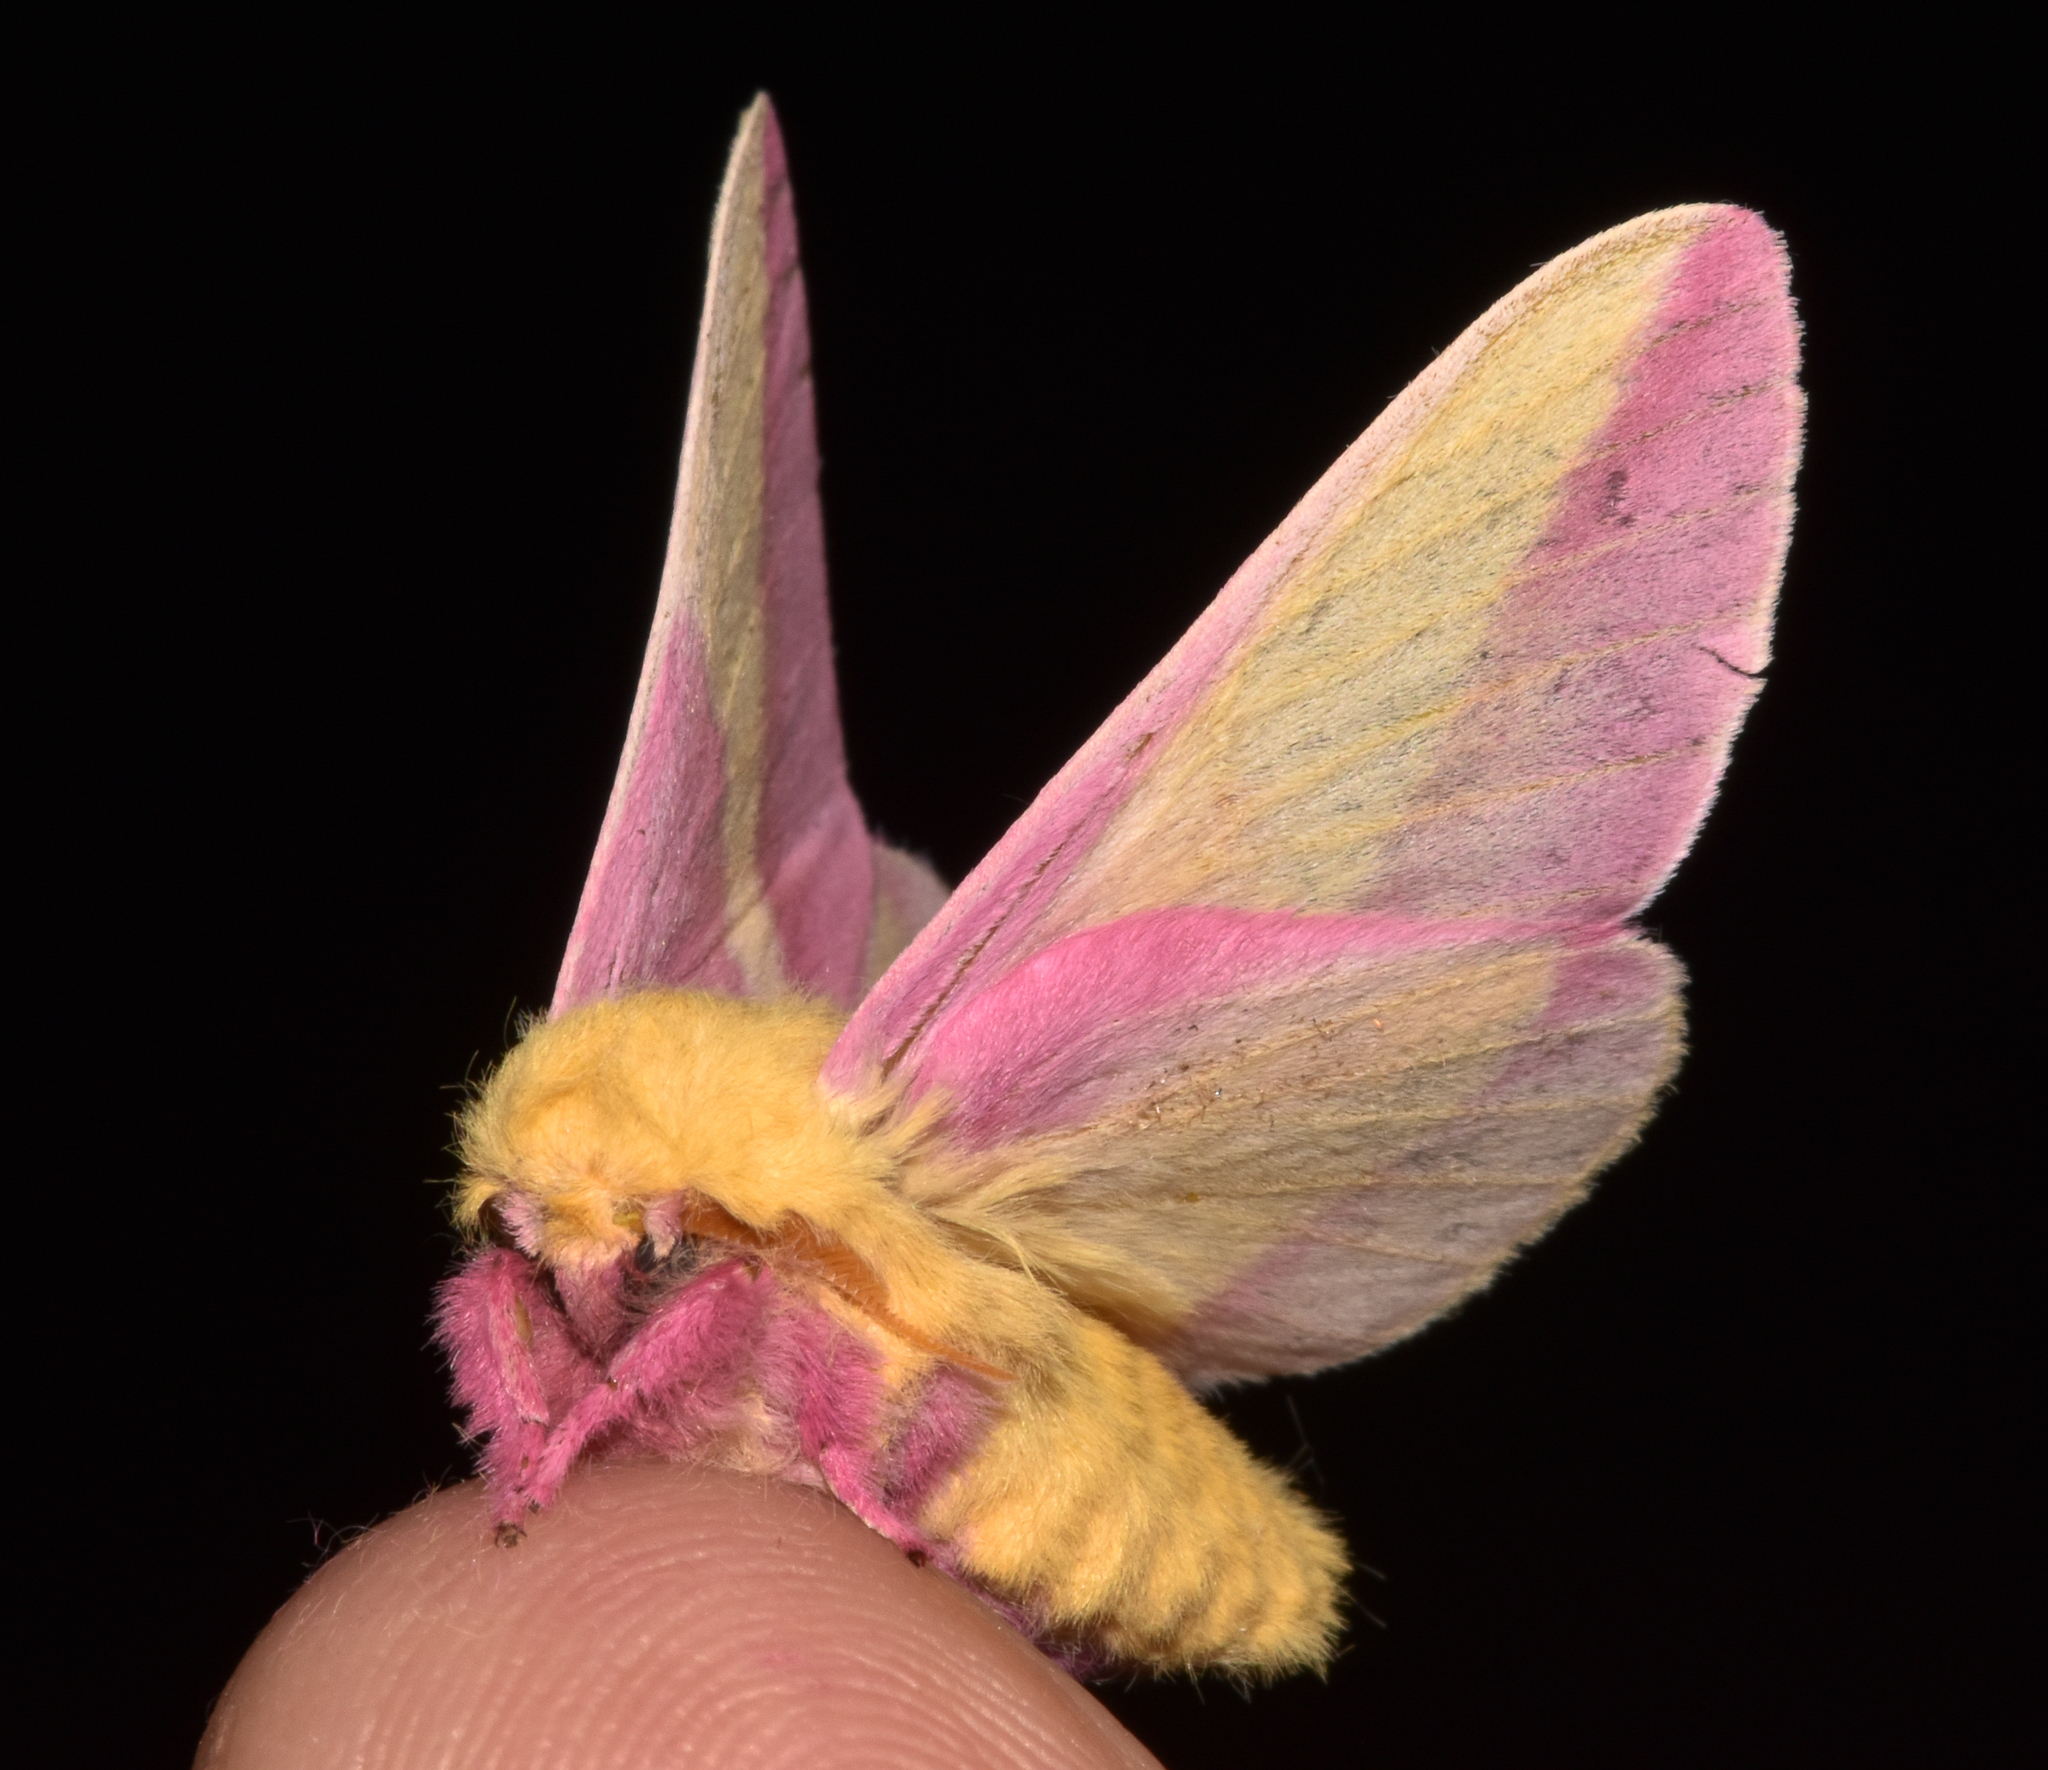 Rosy Maple Moth l Amazing Colors - Our Breathing Planet